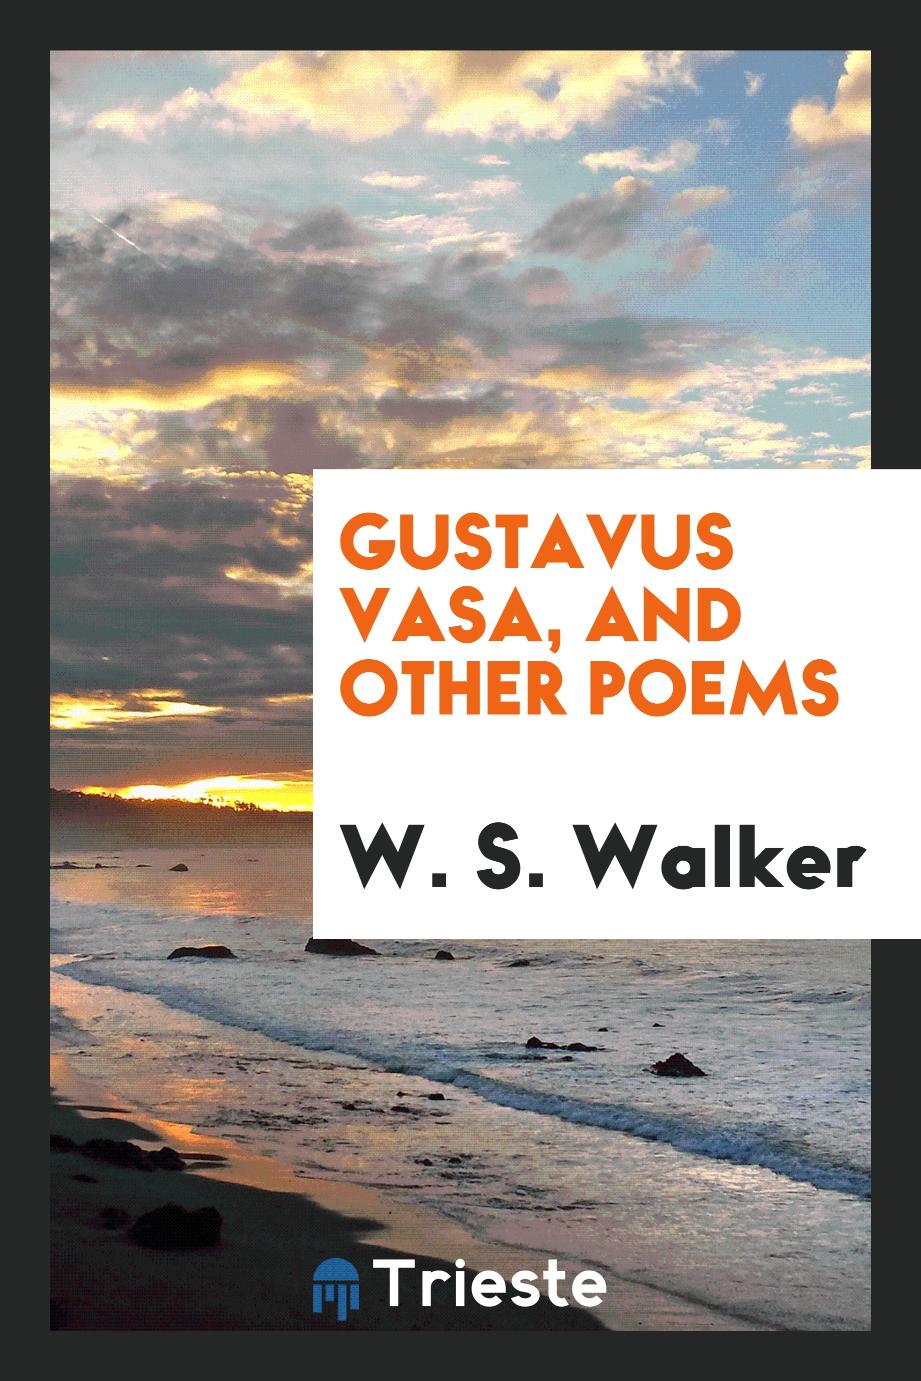 Gustavus Vasa, and other poems